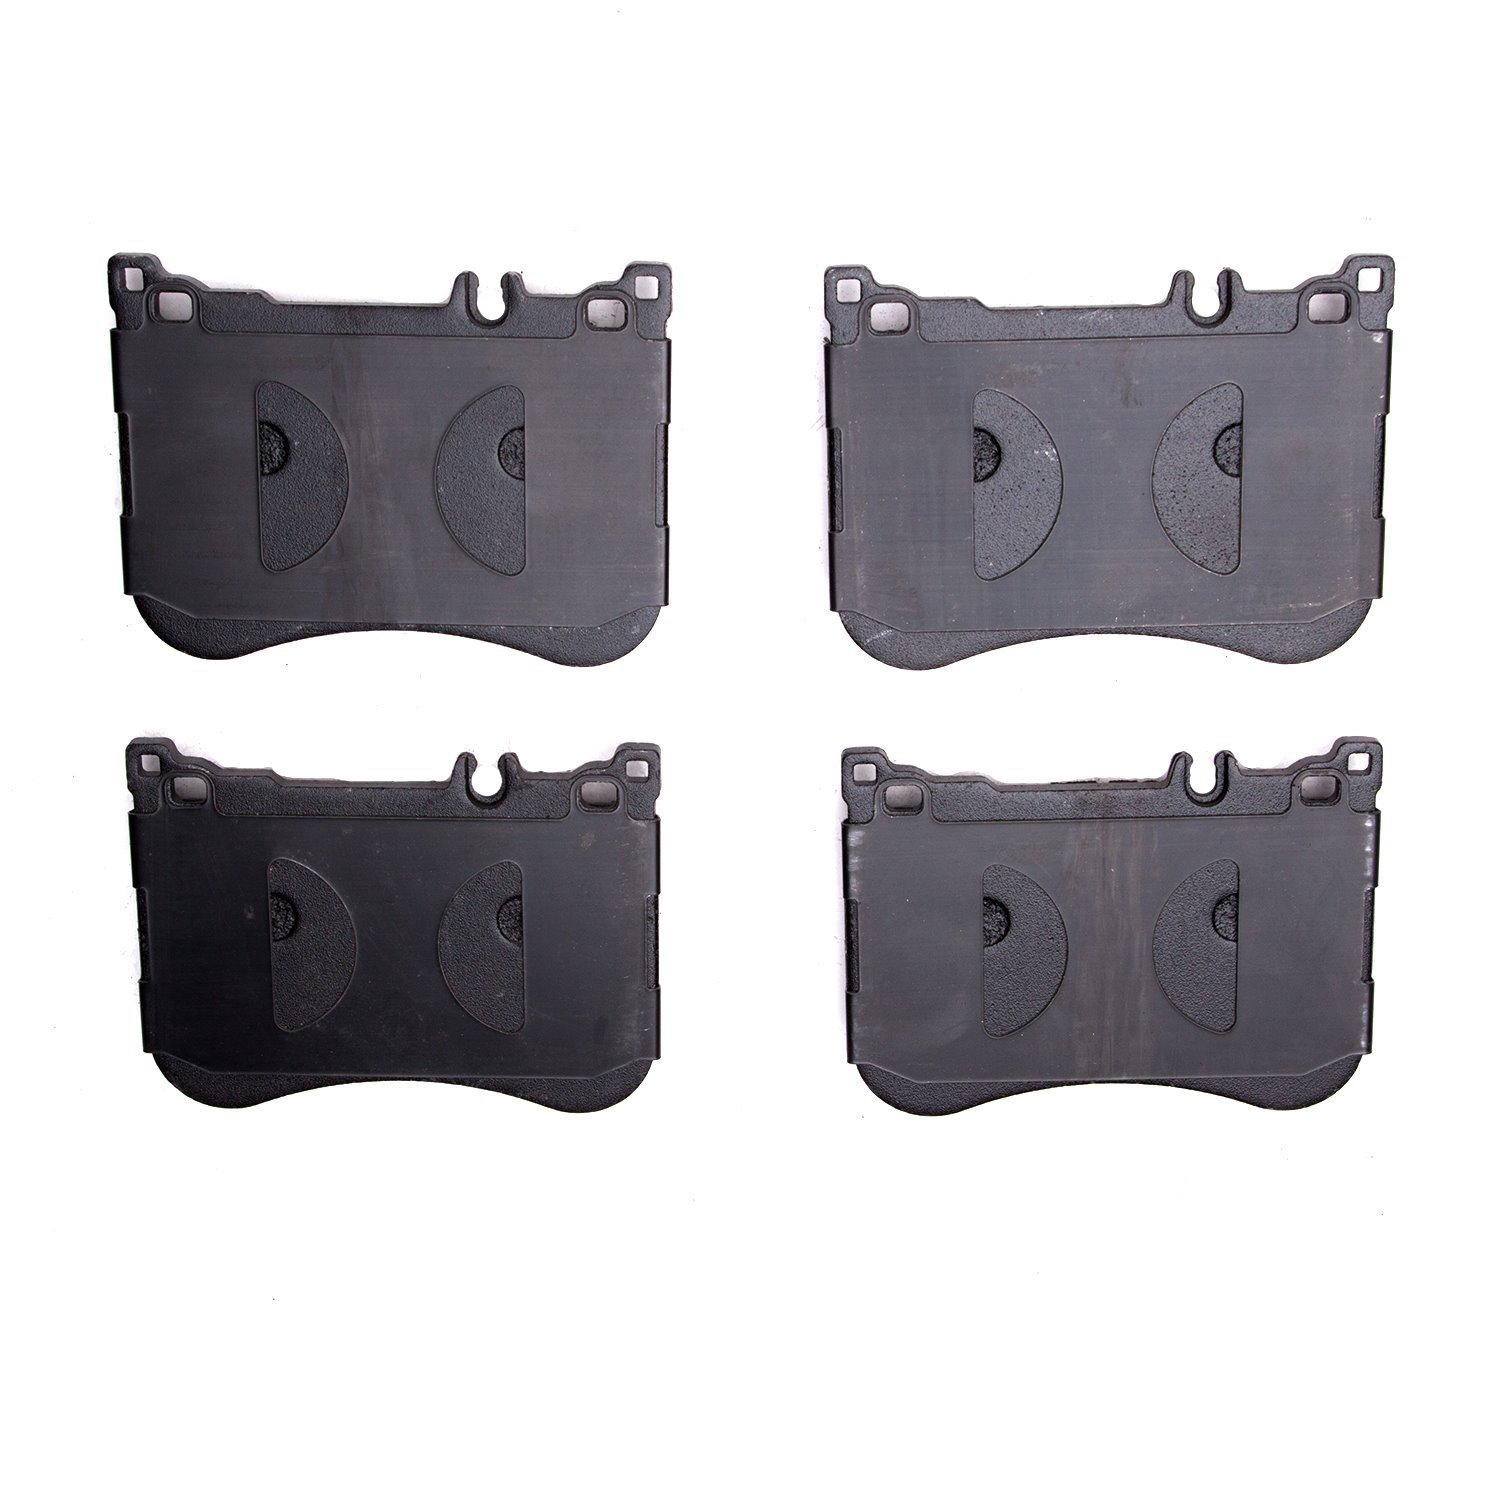 1310-1688-00 3000-Series Ceramic Brake Pads, Fits Select Mercedes-Benz, Position: Front